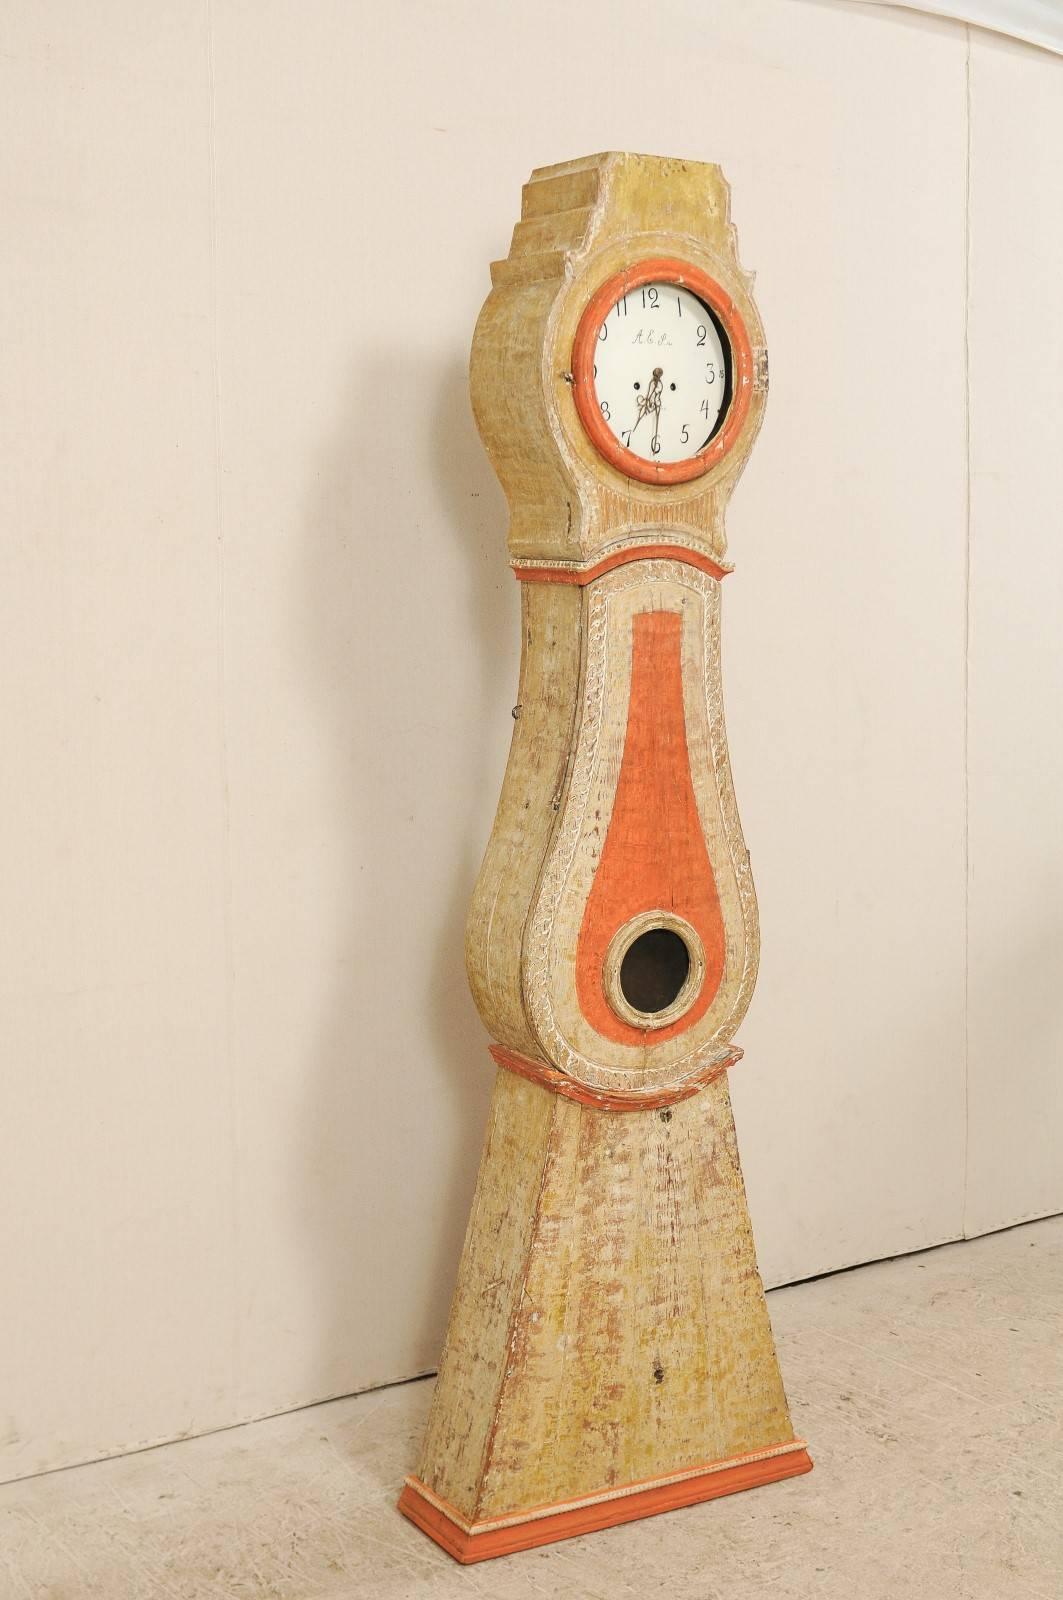 Carved 19th Century Painted Wood Swedish Clock with Warm Tangerine Accents